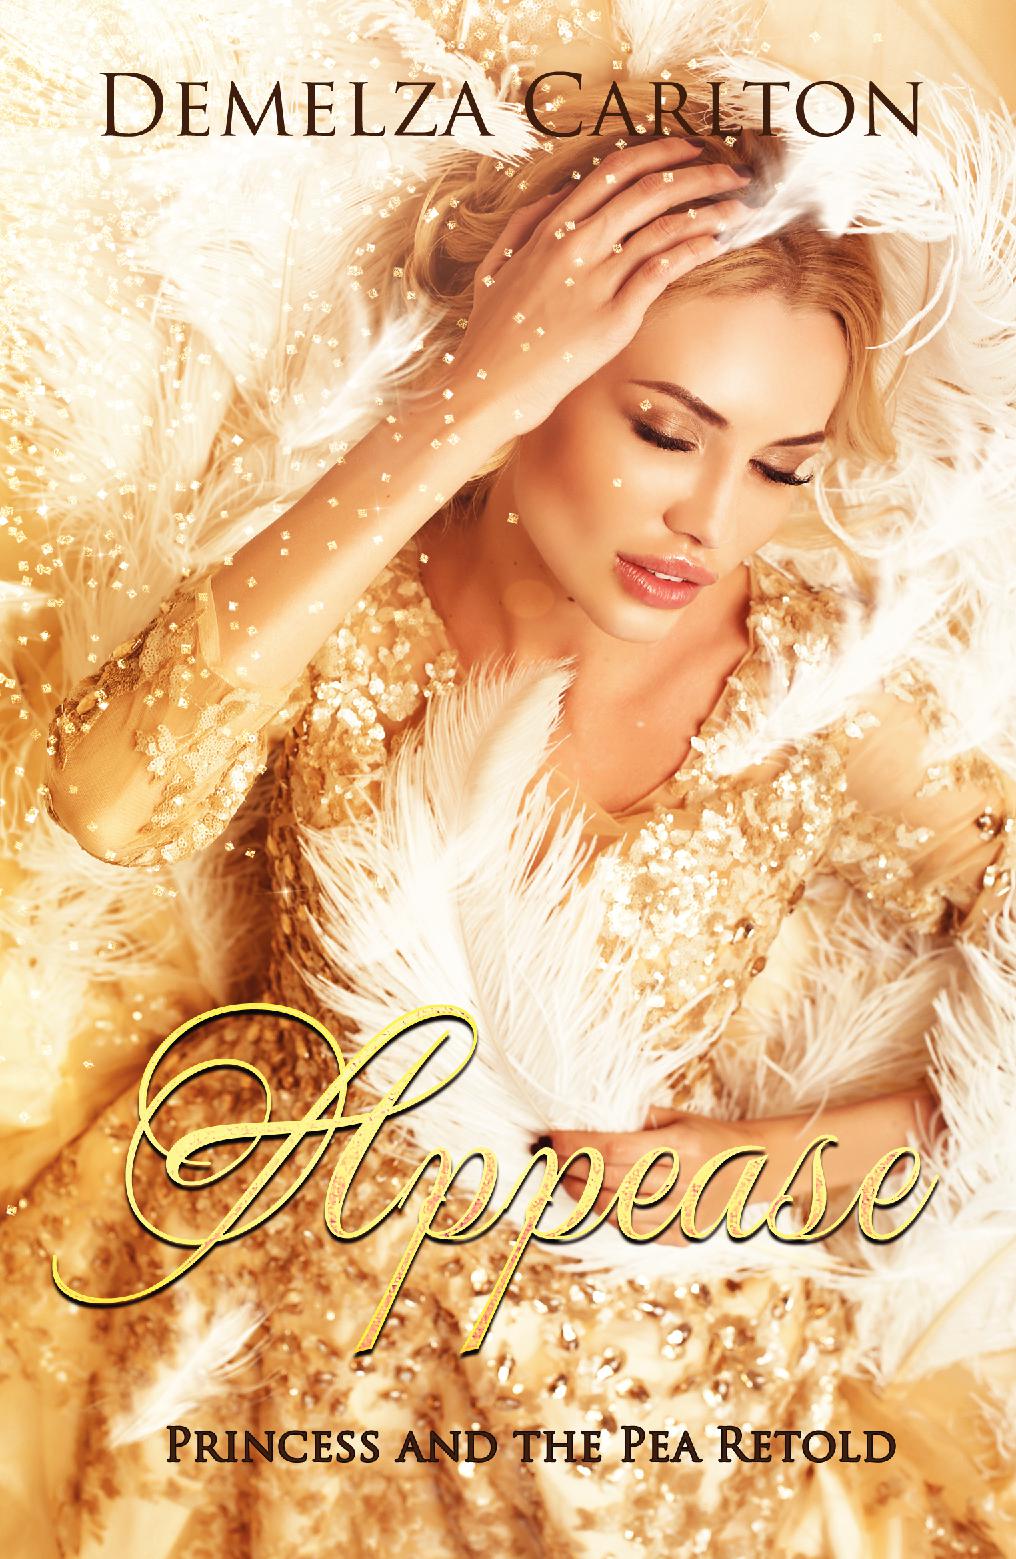 Appease: Princess and the Pea Retold (Book 8 in the Romance a Medieval Fairytale series) PAPERBACK